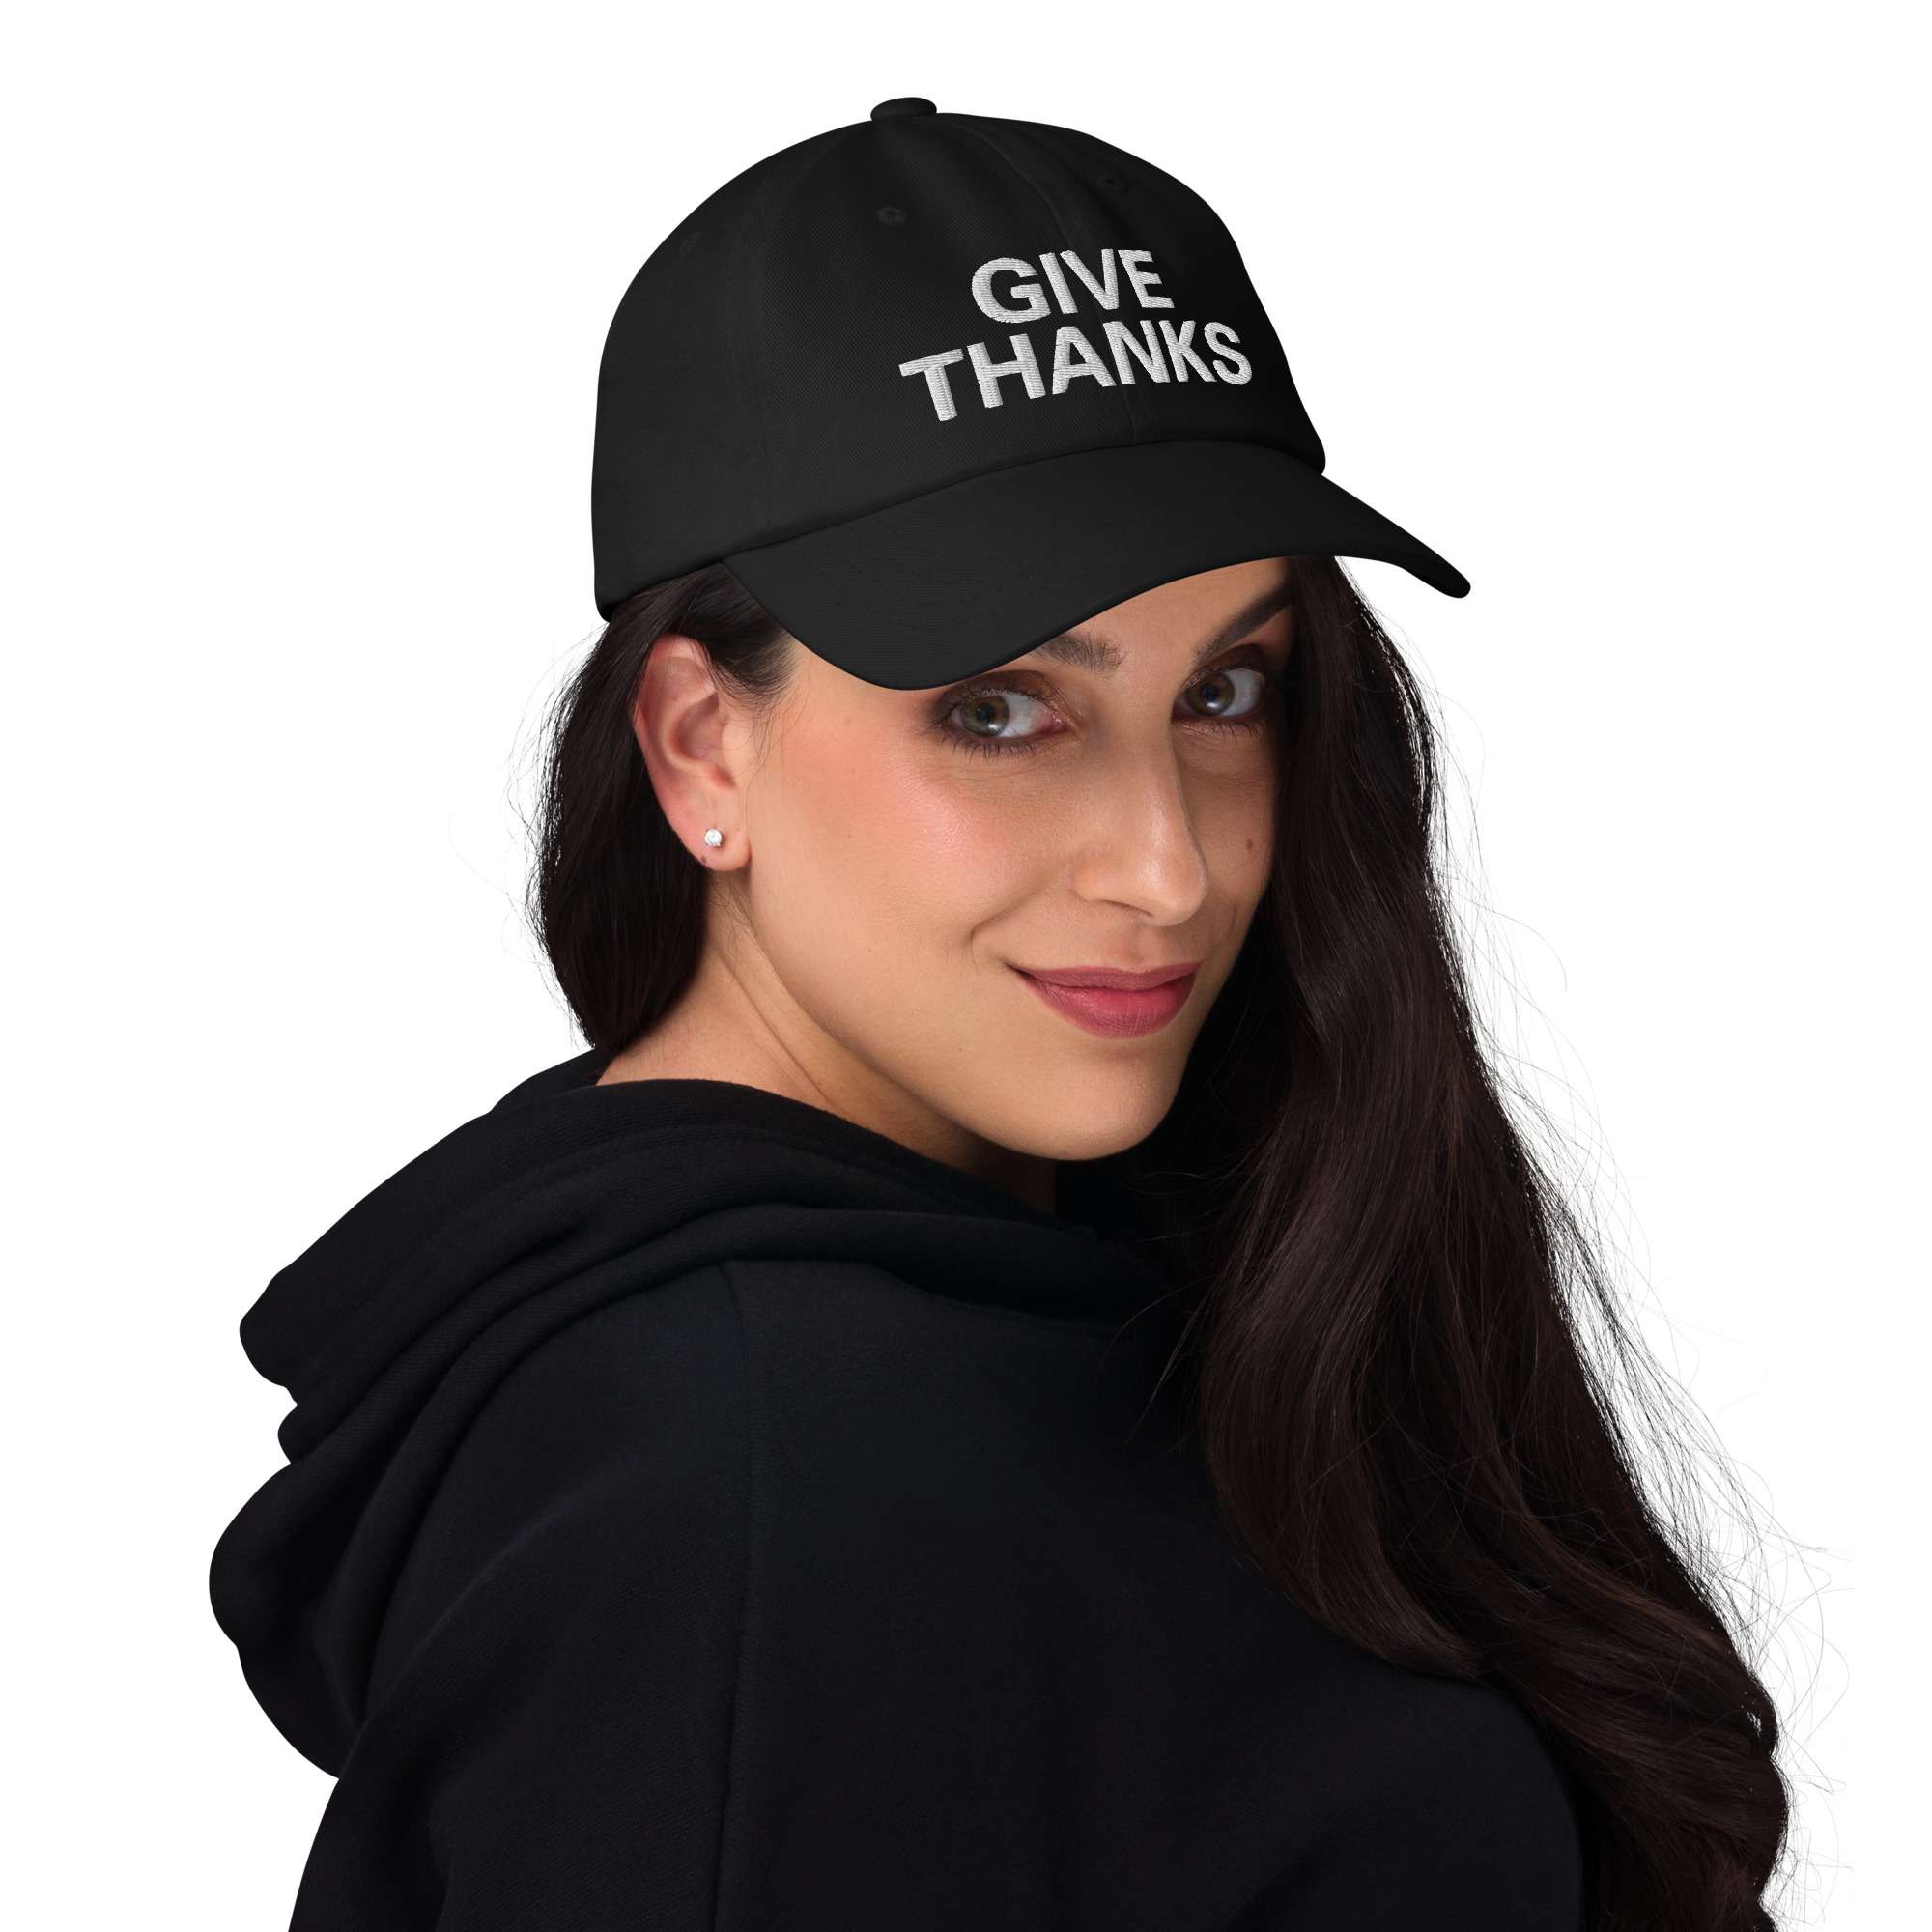 Give Thanks Rasta Cap front view female available in khaki camoflage print and black colors. White embroidered lettering and dad hat style. Rastaseed original design.